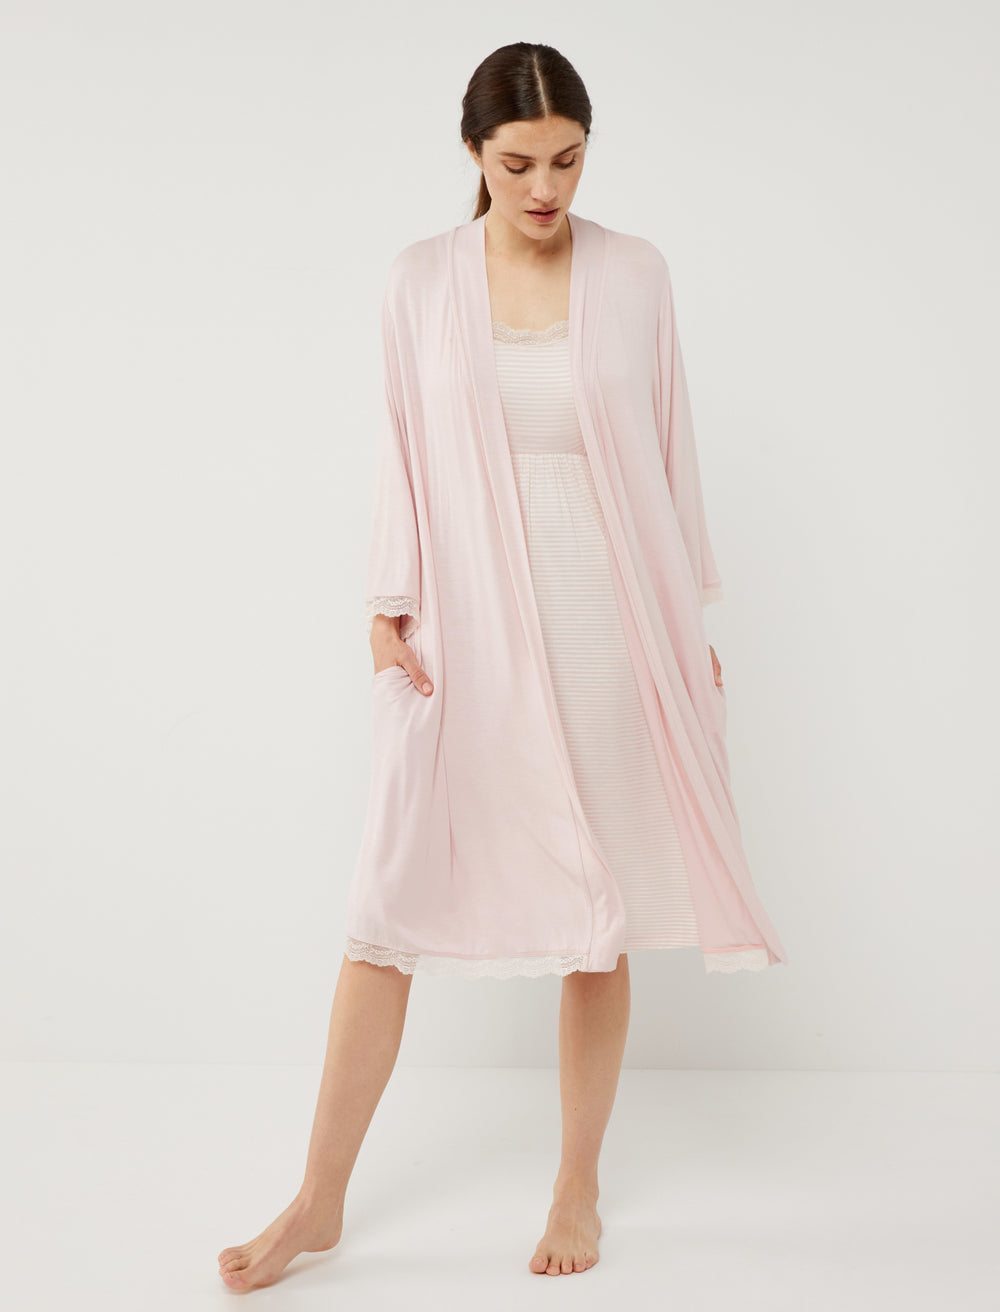 The Best Nursing Nightgown, Robe, and Pajama Sets That Are Comfortable and  Functional | Maternity robe, Nursing nightgown, Maternity sleepwear